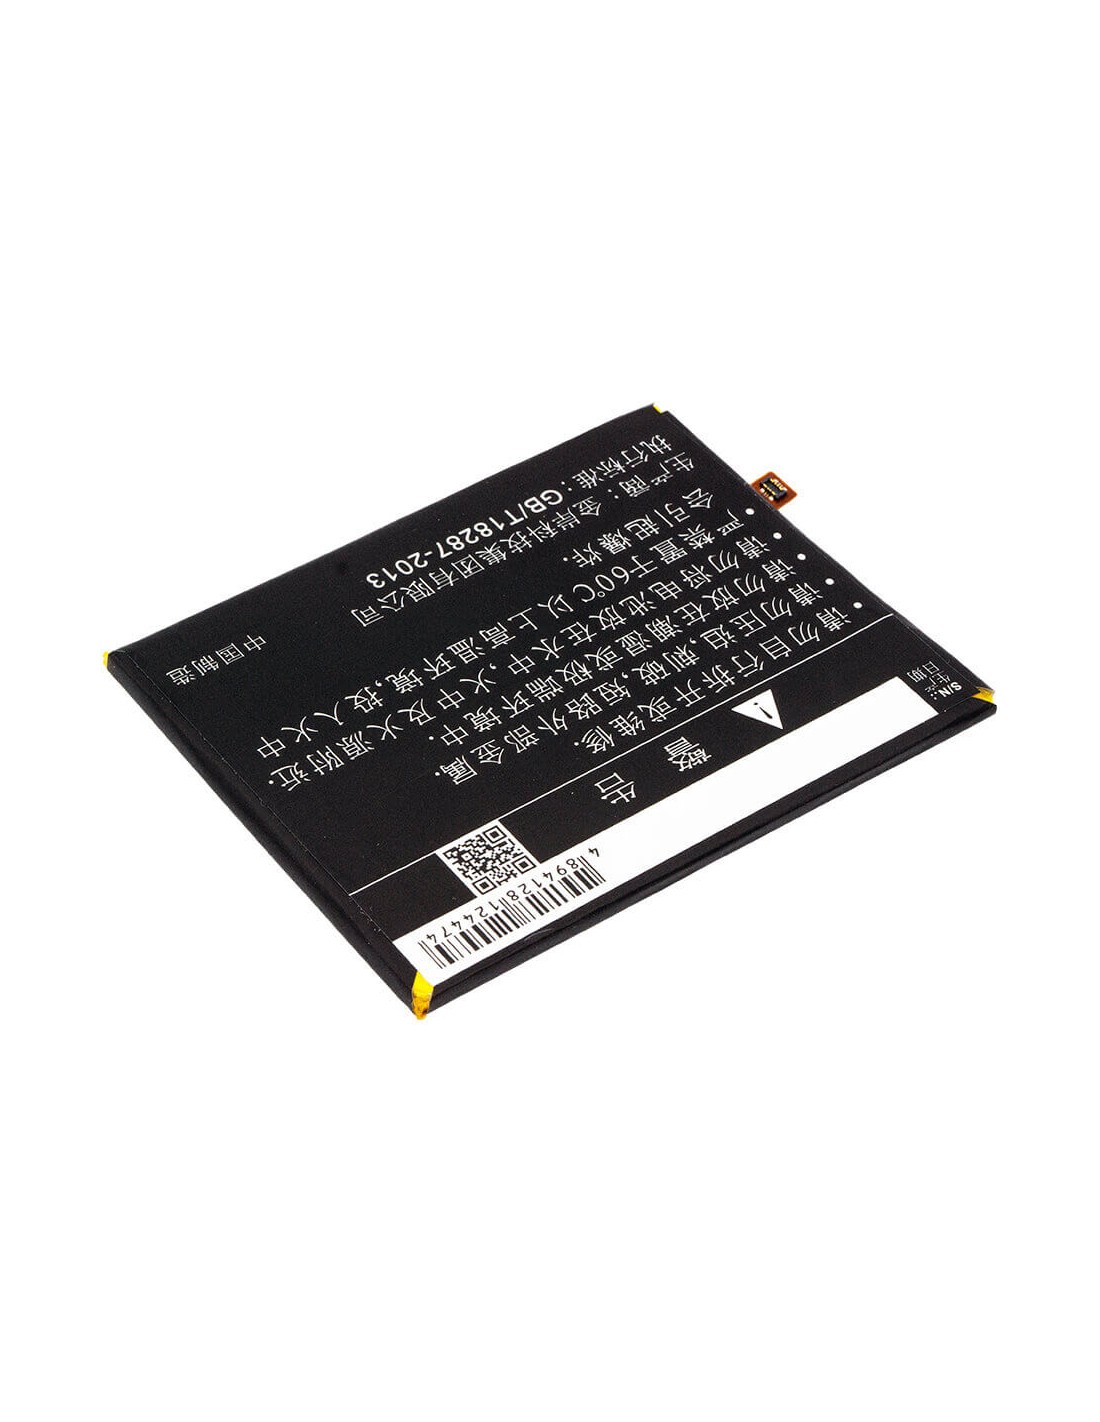 Battery for Coolpad, Fengshang Pro 2, Fengshang Pro 2 Dual Sim 3.8V, 2500mAh - 9.50Wh